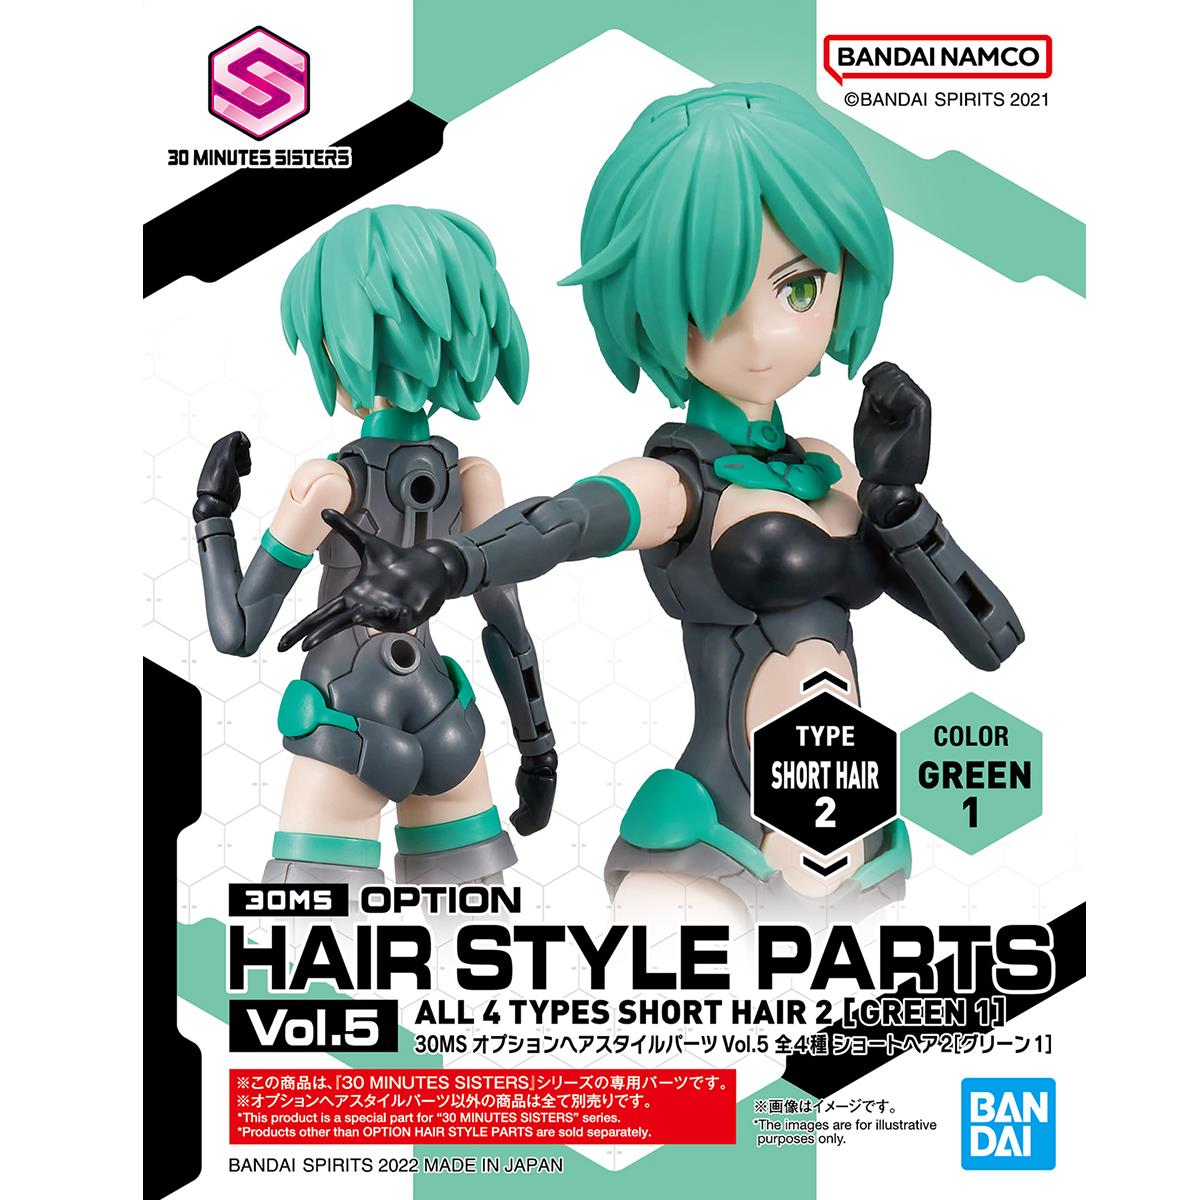 30 Minutes Sisters: Option Hair Style Parts Vol. 5 Model Option Packs